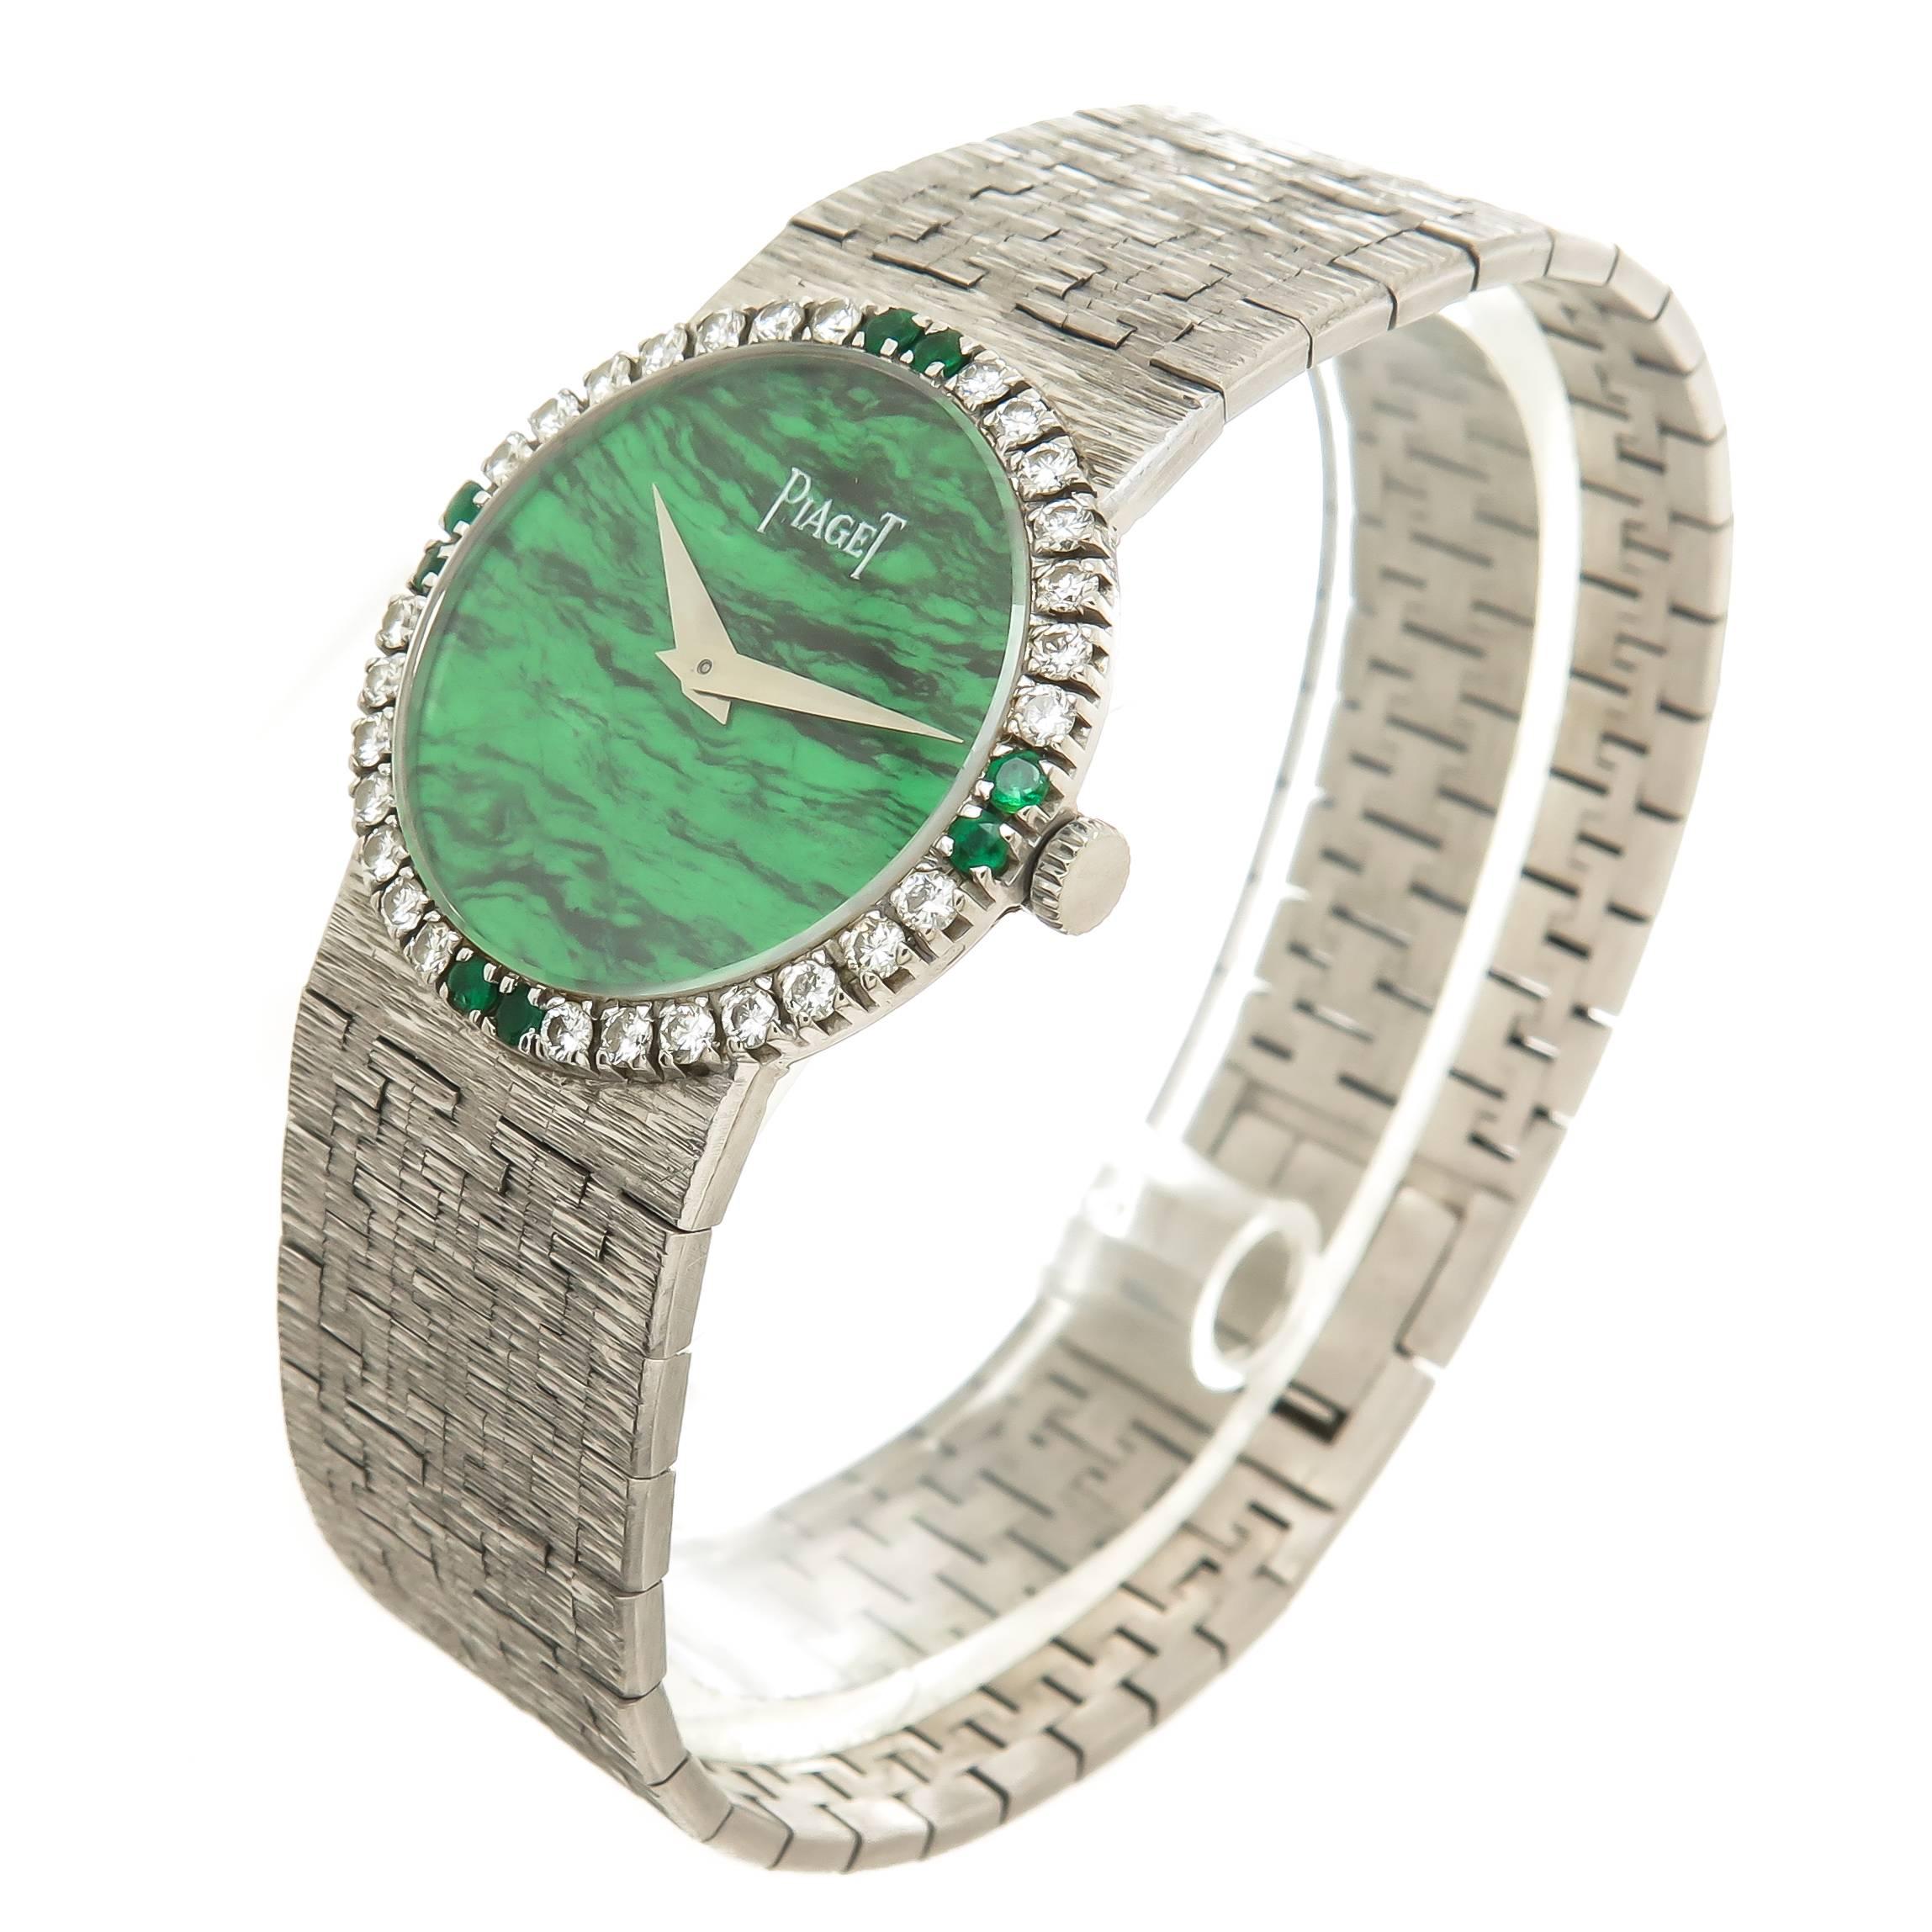 Circa 1970 Piaget Ladies Wrist Watch 18K White Gold water resistant case measuring 24 MM with Round Brilliant Cut Diamond and Emerald Bezel. 17 Jewel mechanical, manual wind Movement, Malachite Dial and White Gold Hands. 18K White Gold Piaget signed